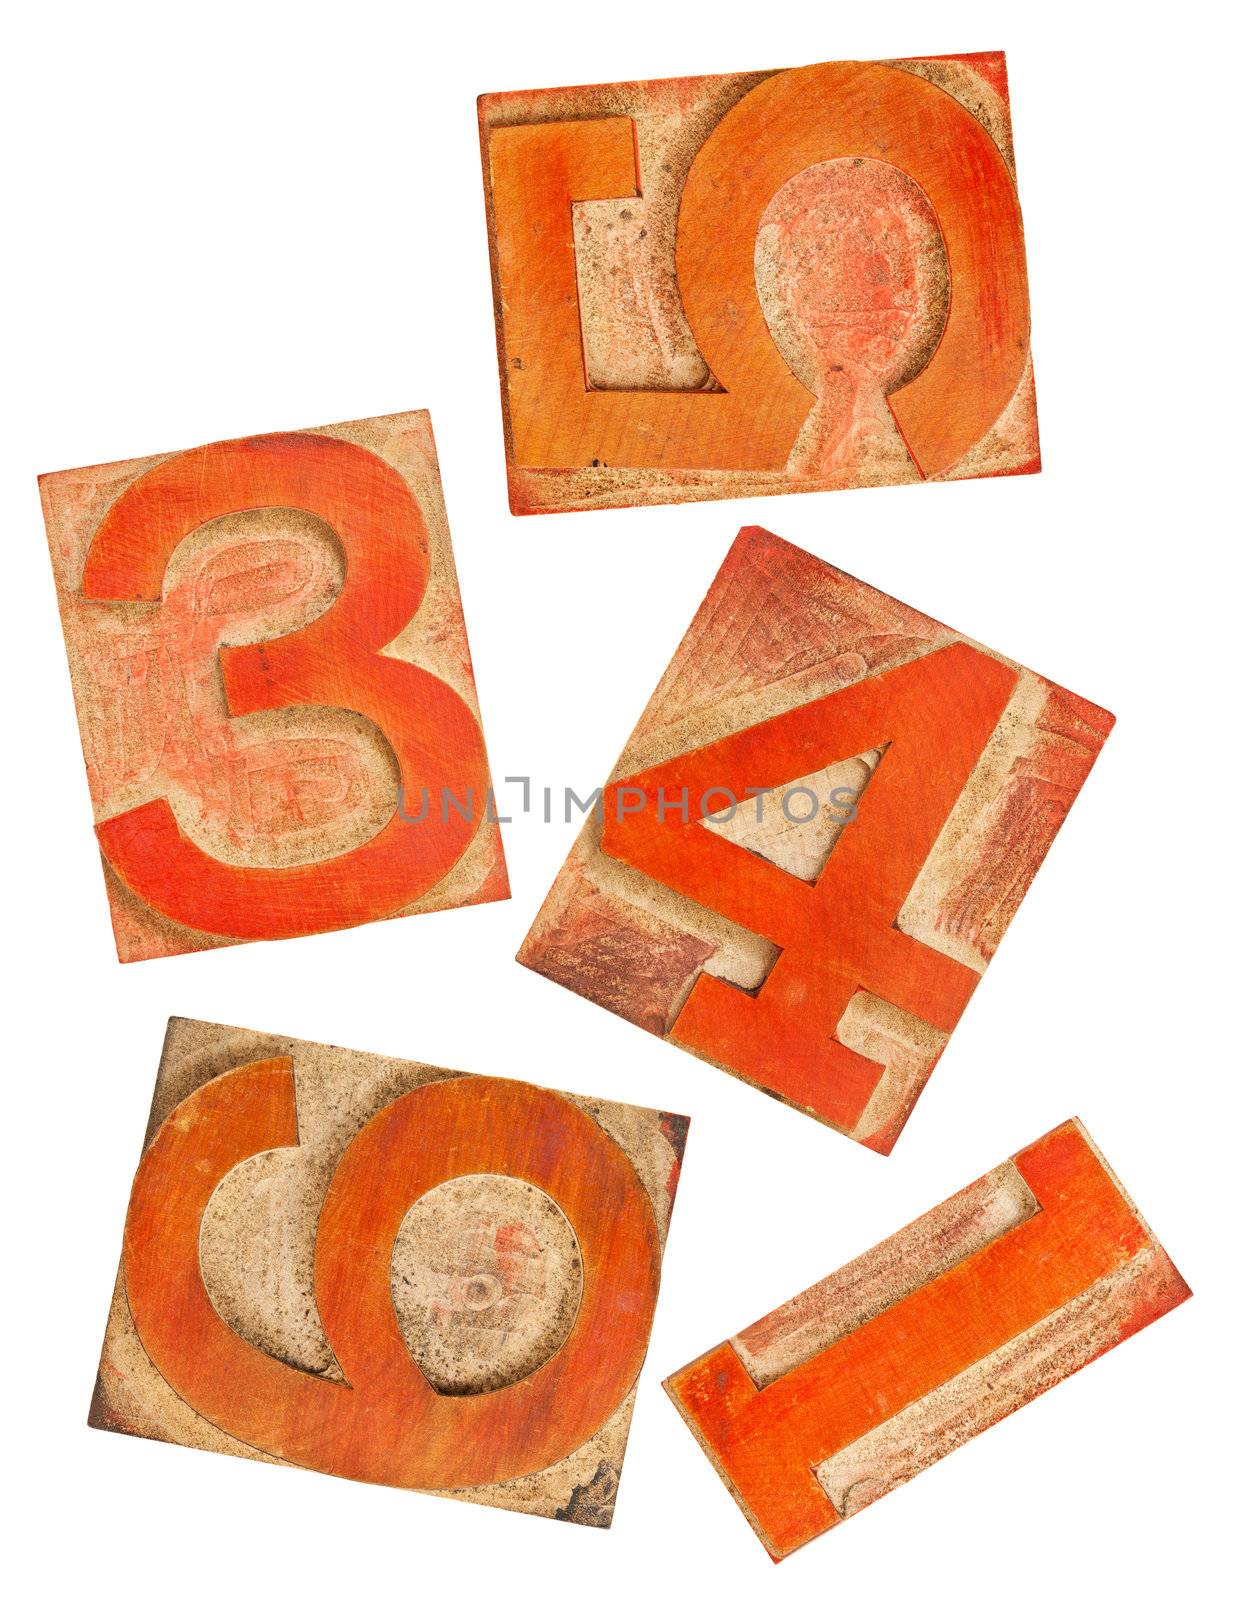 selected numbers in isolated  wooden letterpress printing blocks stained by red and orange ink